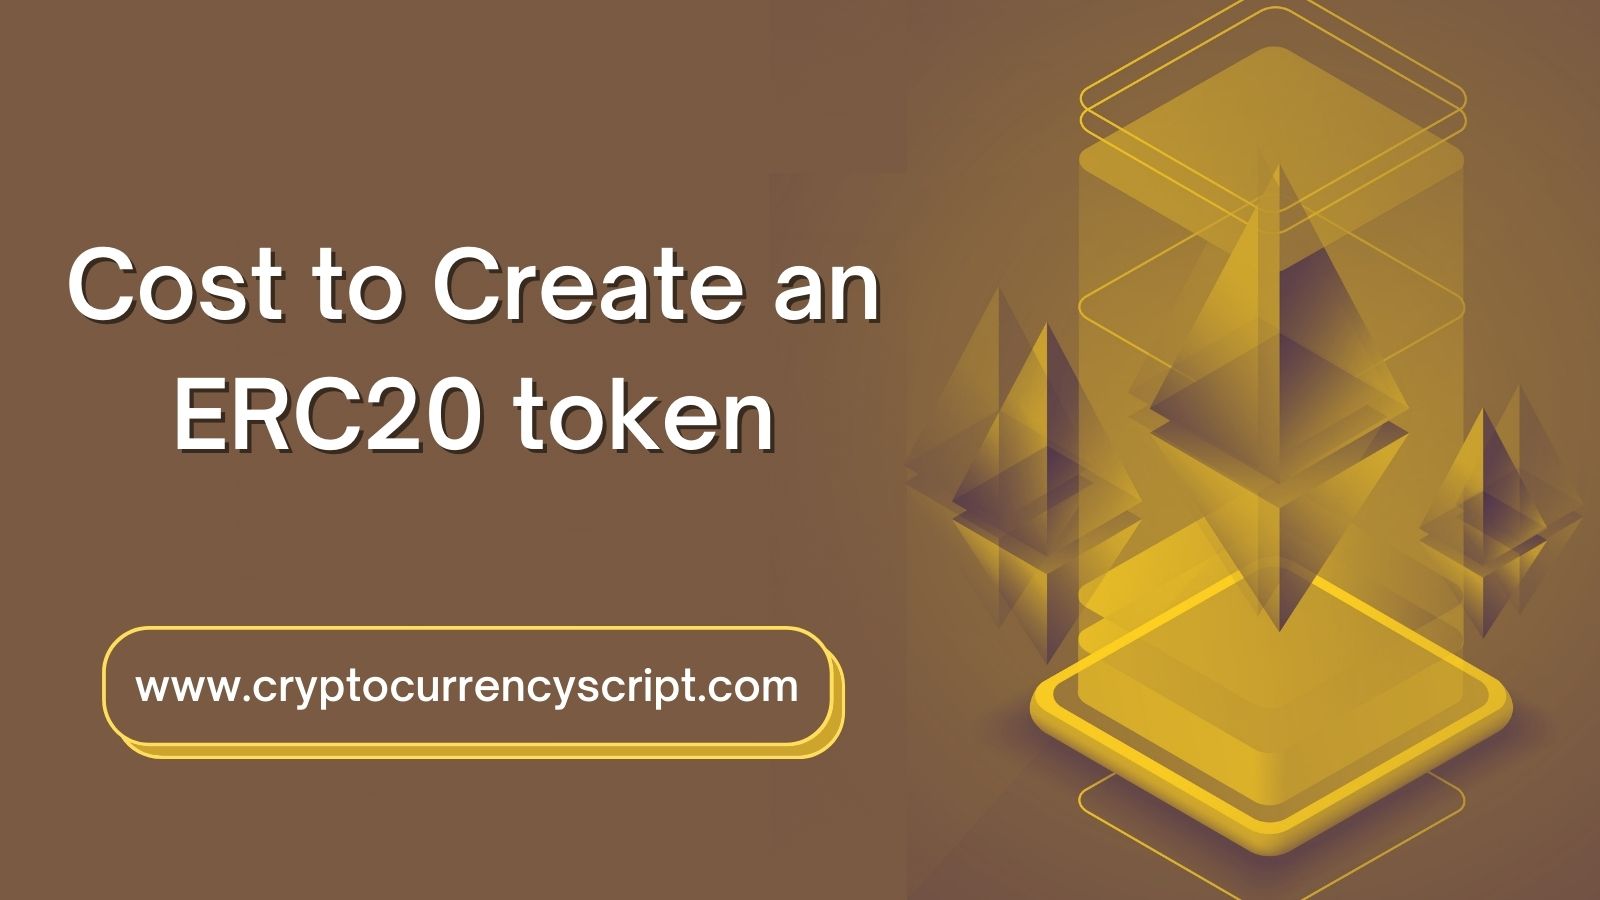 How much Does to Cost to Create an ERC20 token? - Zodeak